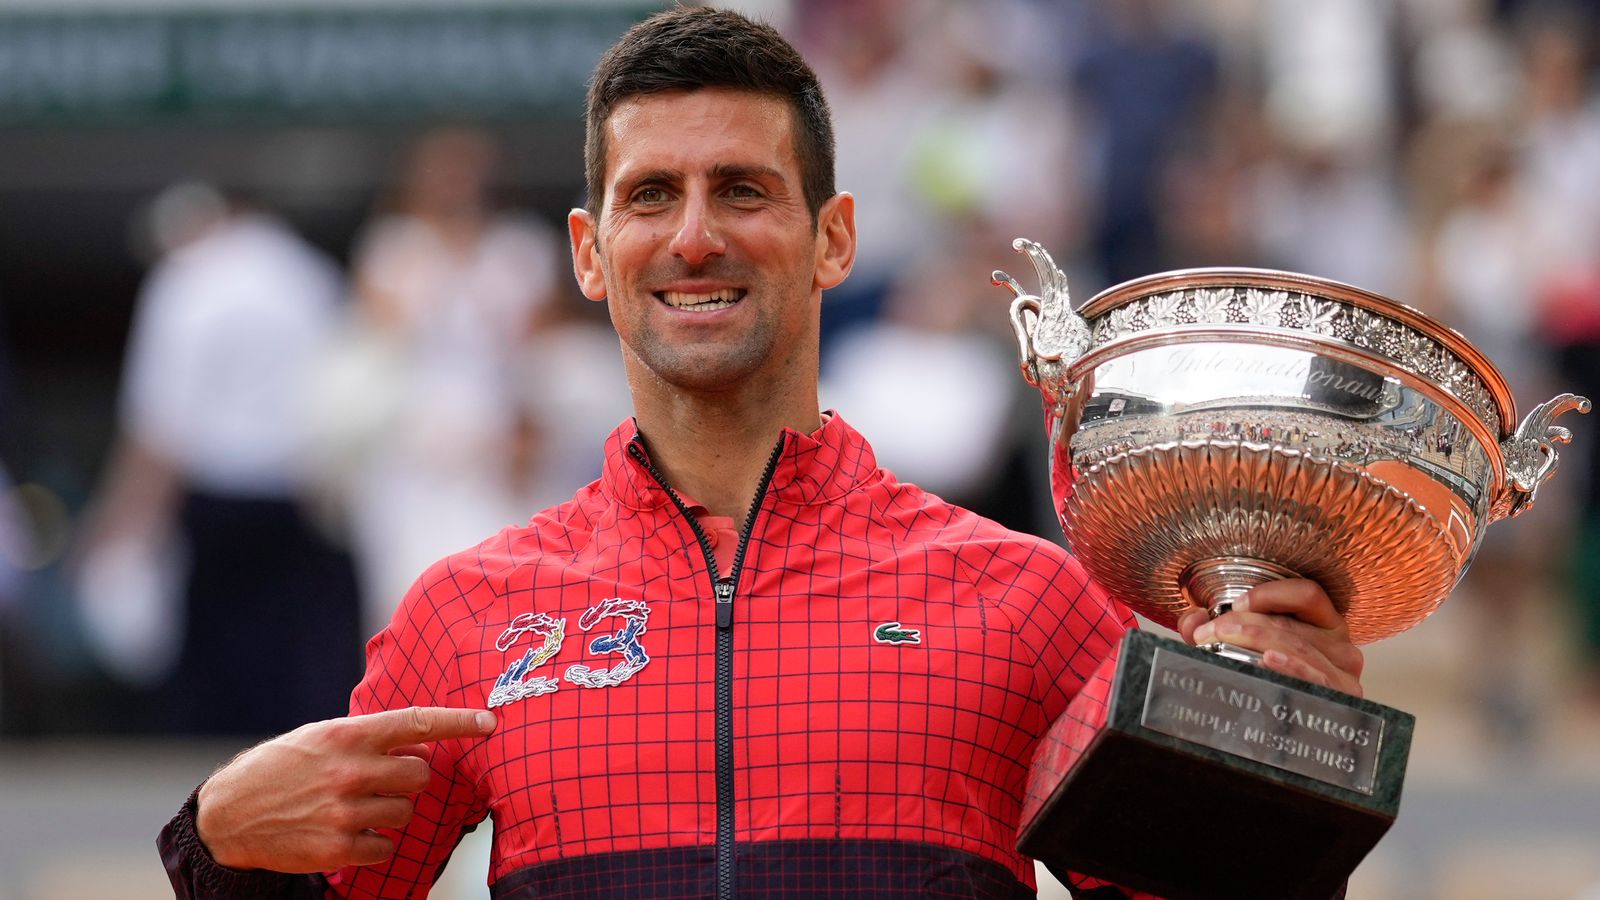 Novak Djokovic French Open winner says he's staying out the GOAT